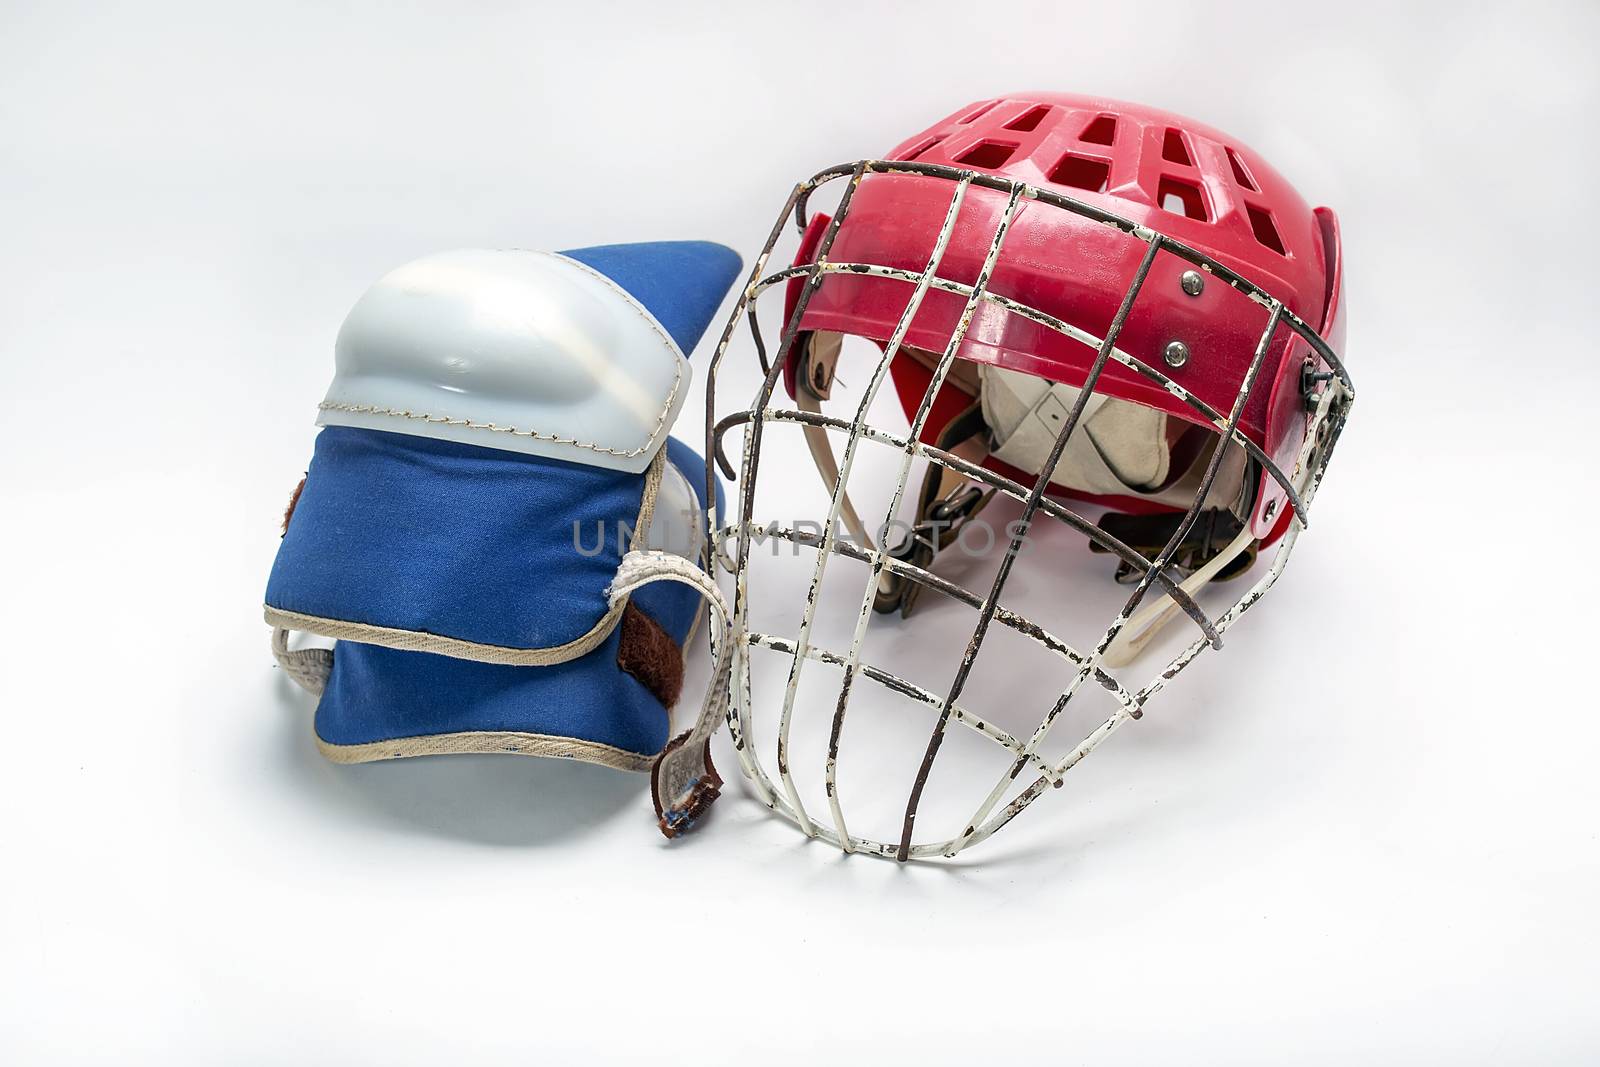 Old hockey helmet gloves and puck on a white background isolated.